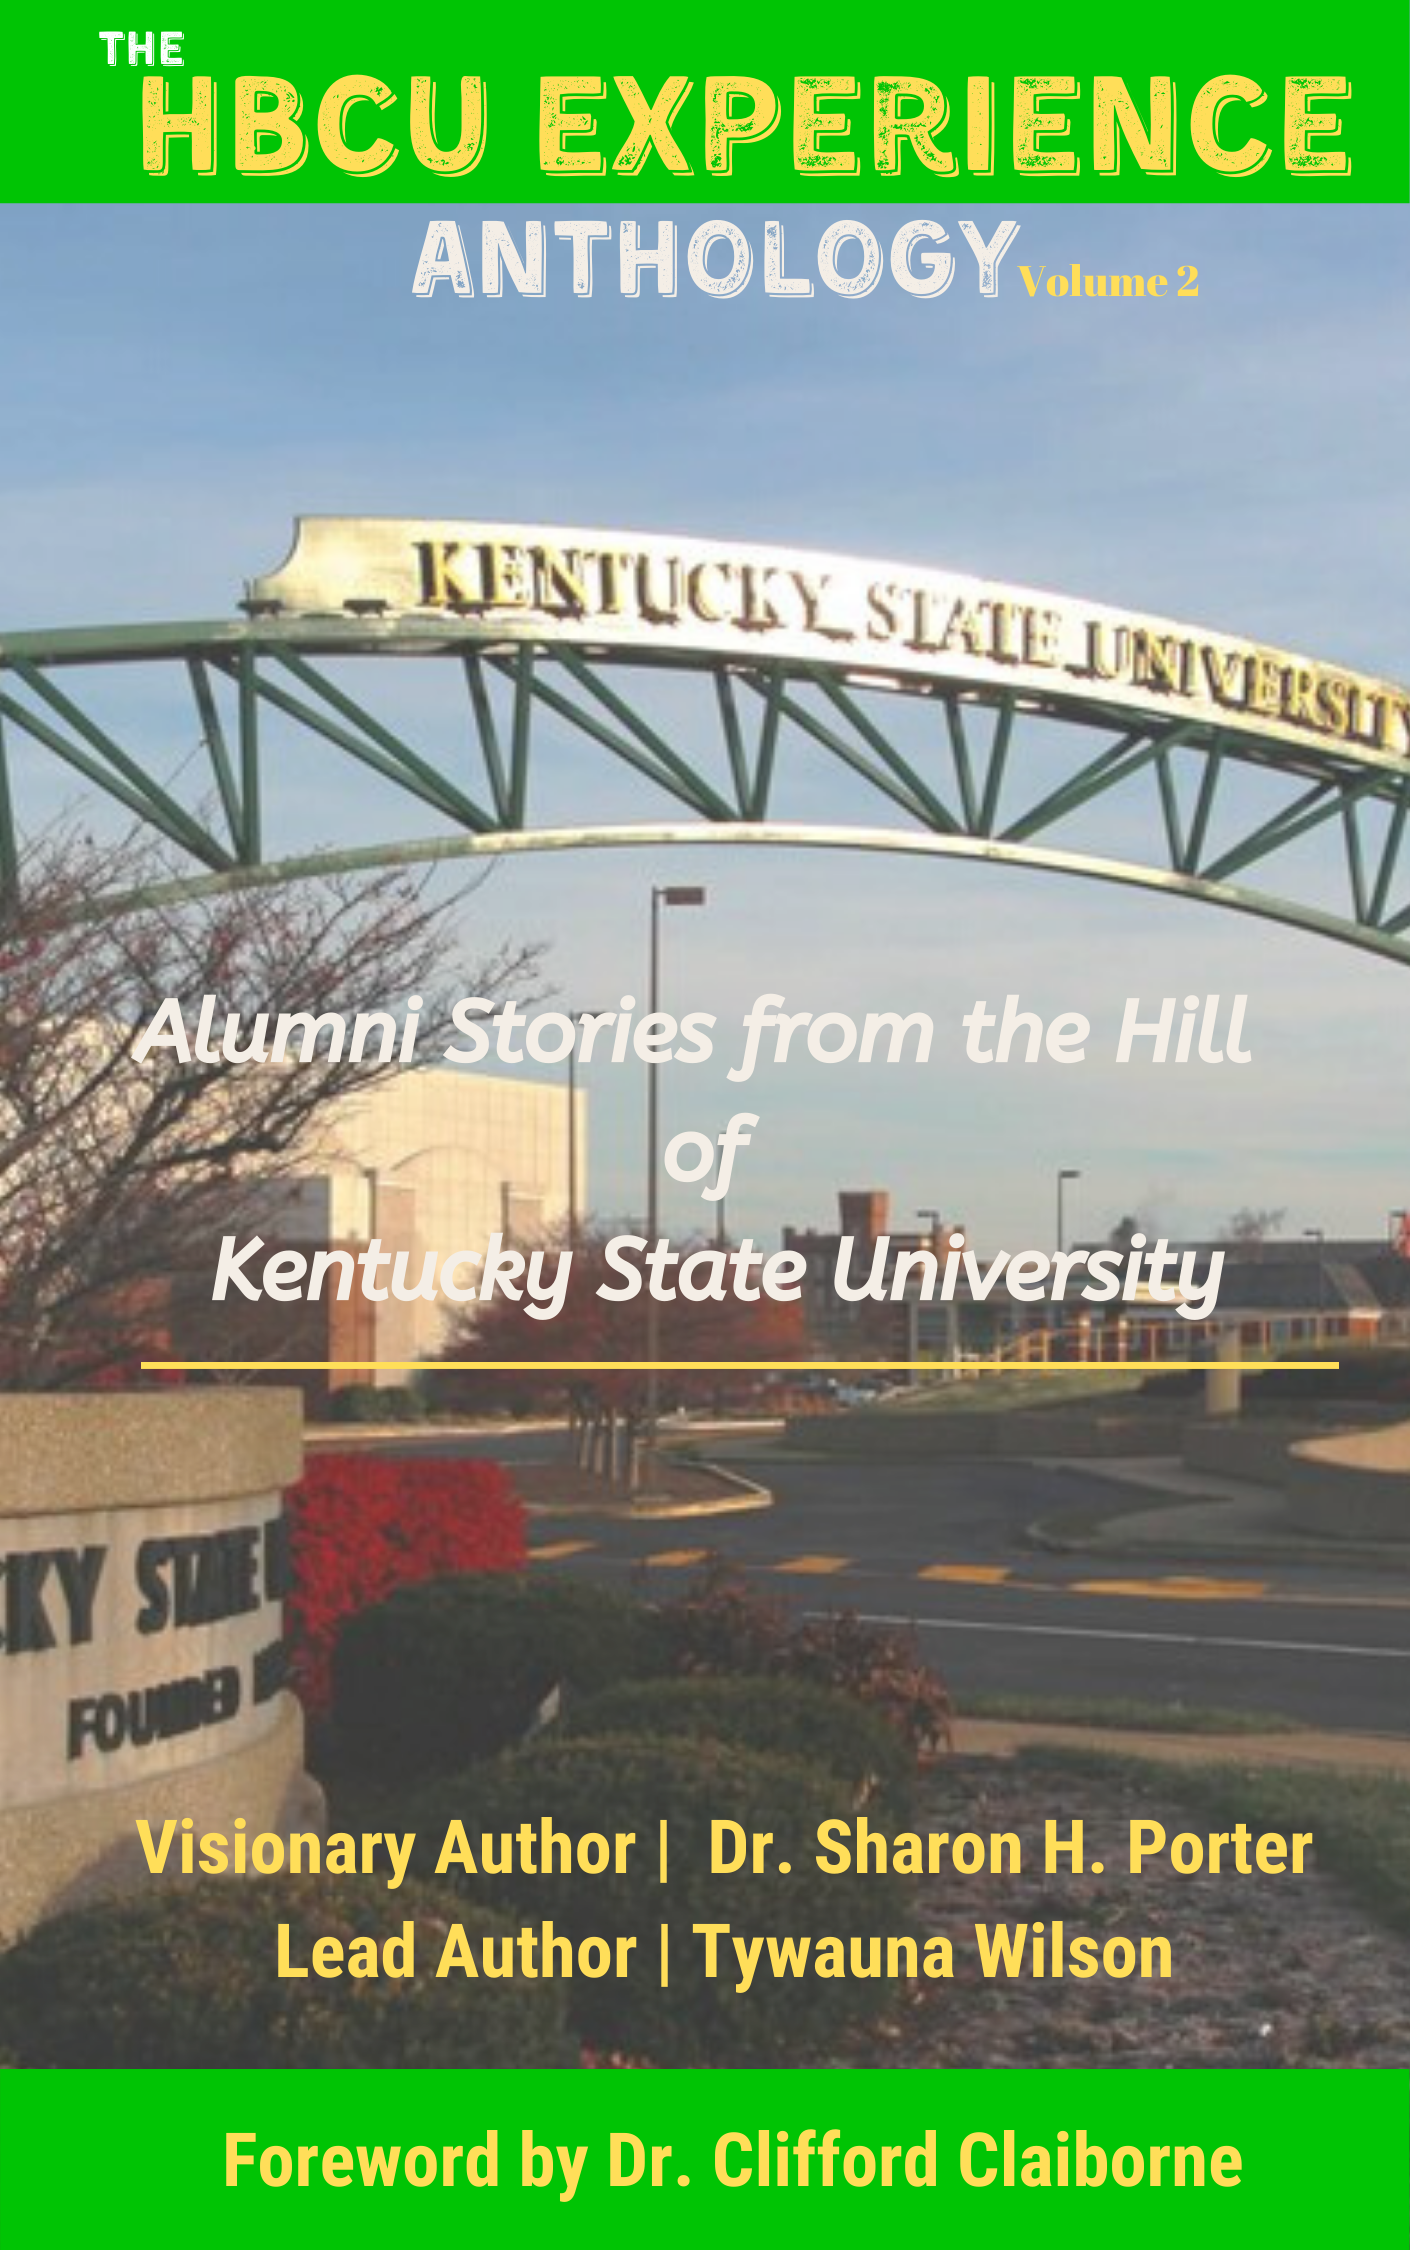 The HBCU Experience, Alumni Stories from the Hill of Kentucky State University